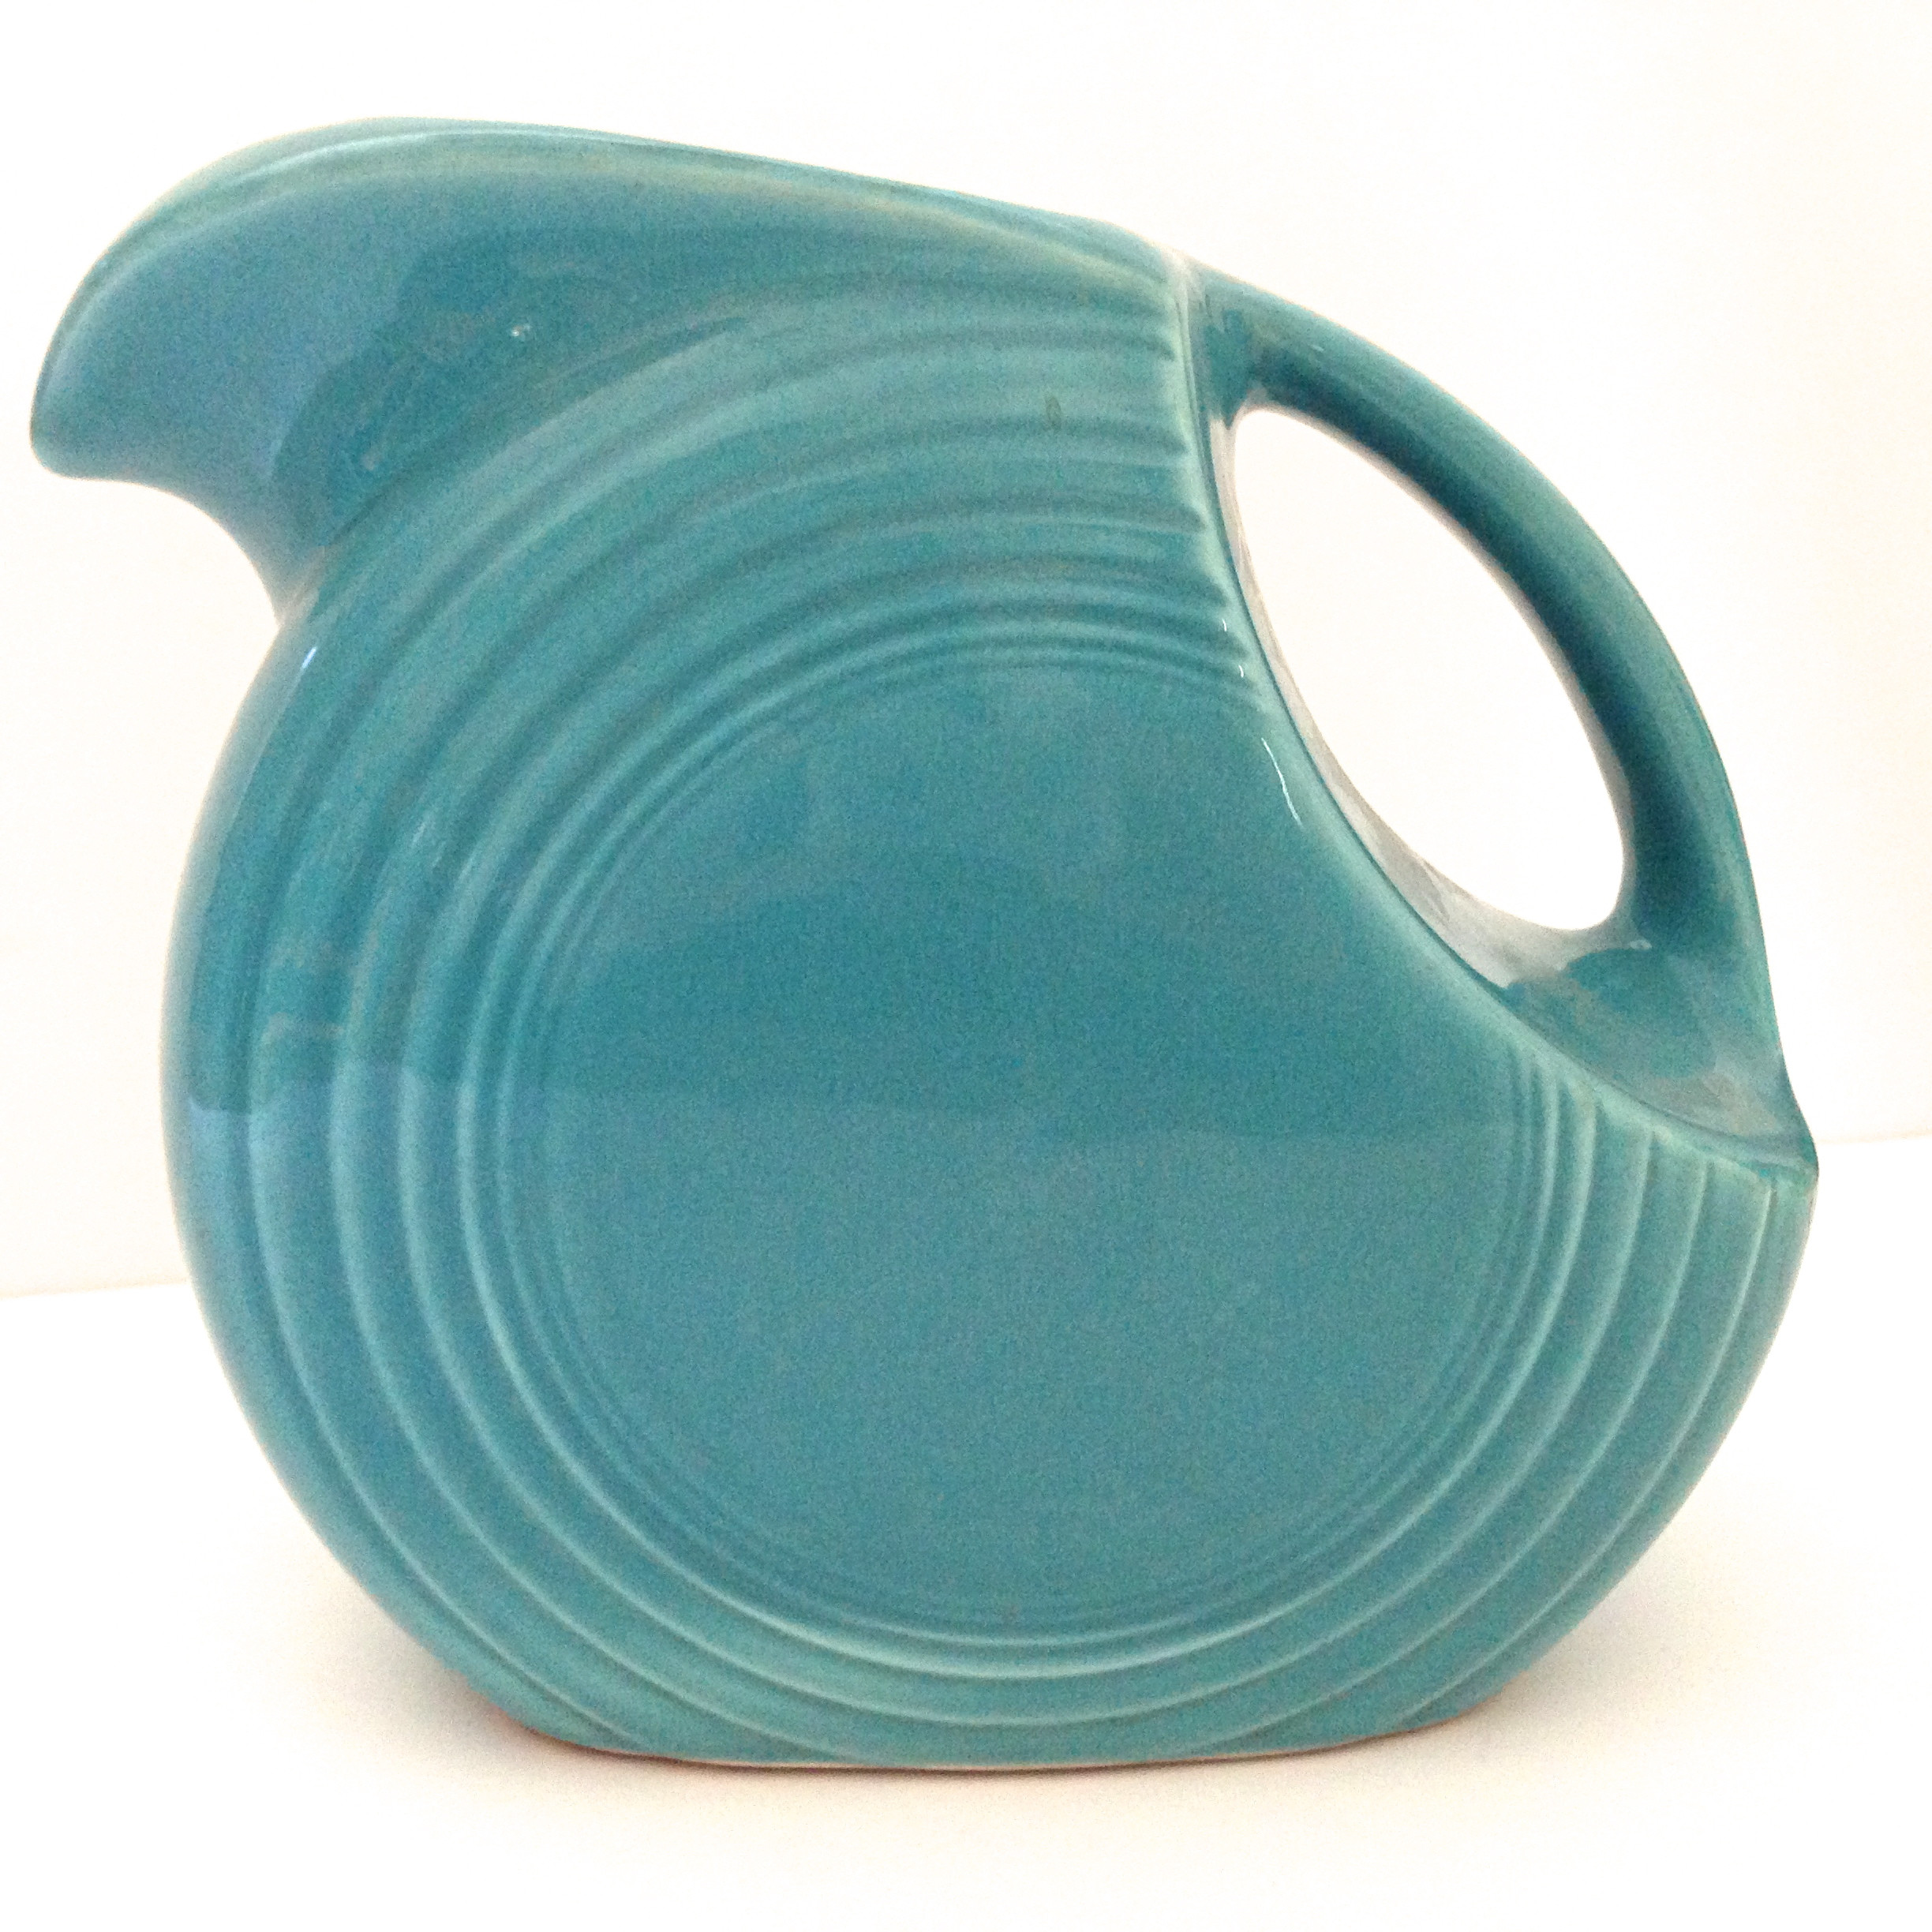 23 Famous Fiestaware Vase Prices 2024 free download fiestaware vase prices of about that vintage fiesta butter dishupdated to include suspected for vintage disk pitcher in original turquoise 1937 1969